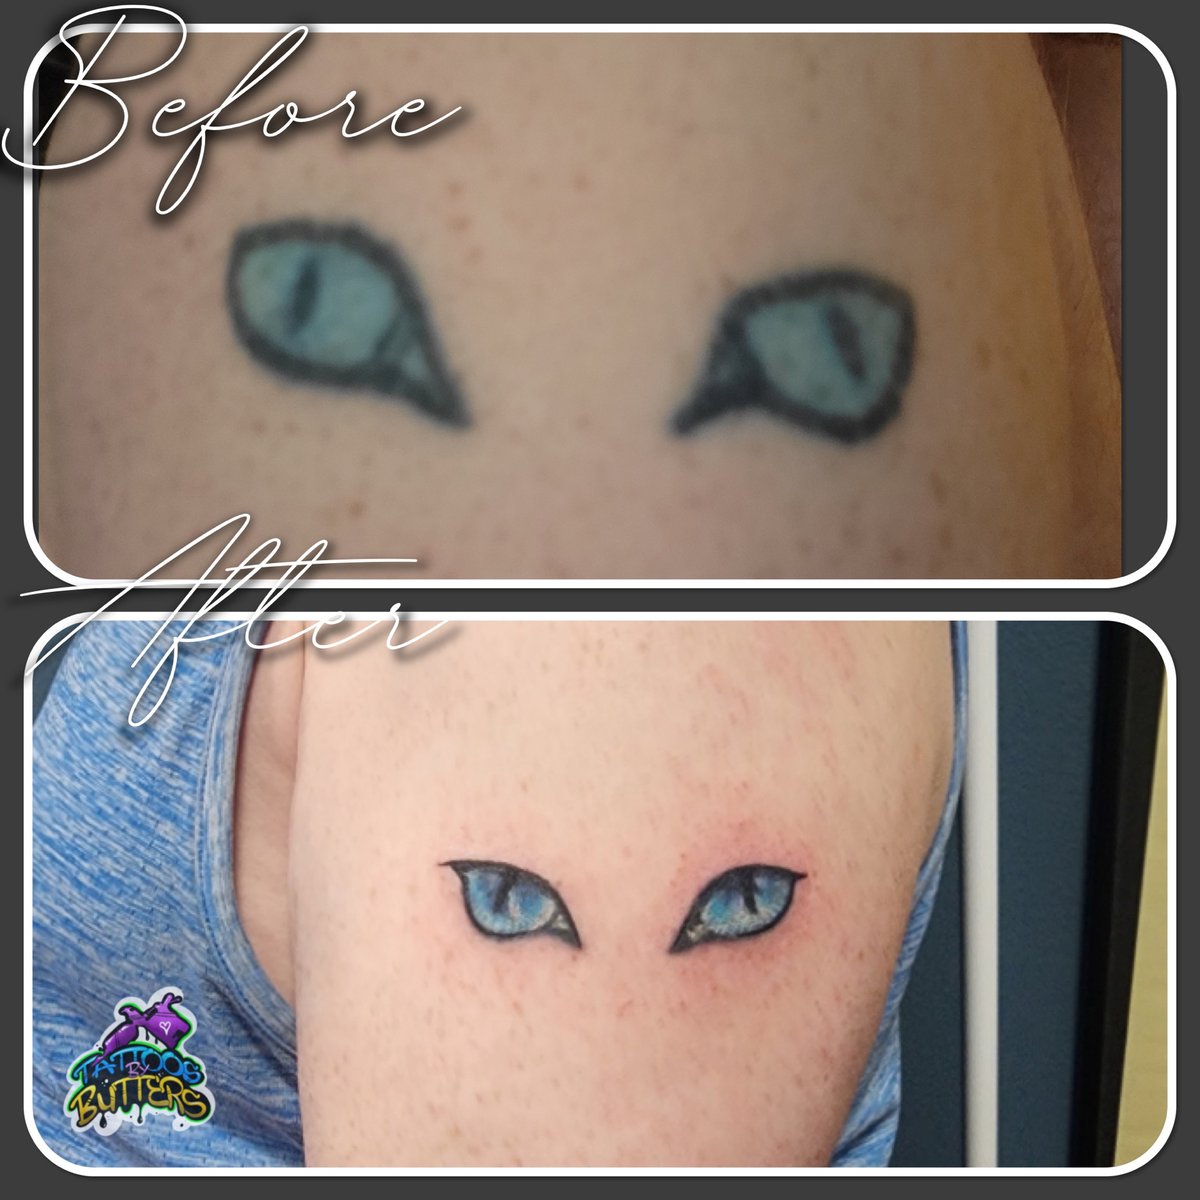 Before and After rework that I got to do. Anybody else have a an old tattoo they want freshened up? feel free to hit me up. 

👉 To book visit my website at 
ashbutters.com
or email me at 
ashbutterstattoos@gmail.com 

#lakemaryfl #orlando #winterparkfl #longwoodfl #